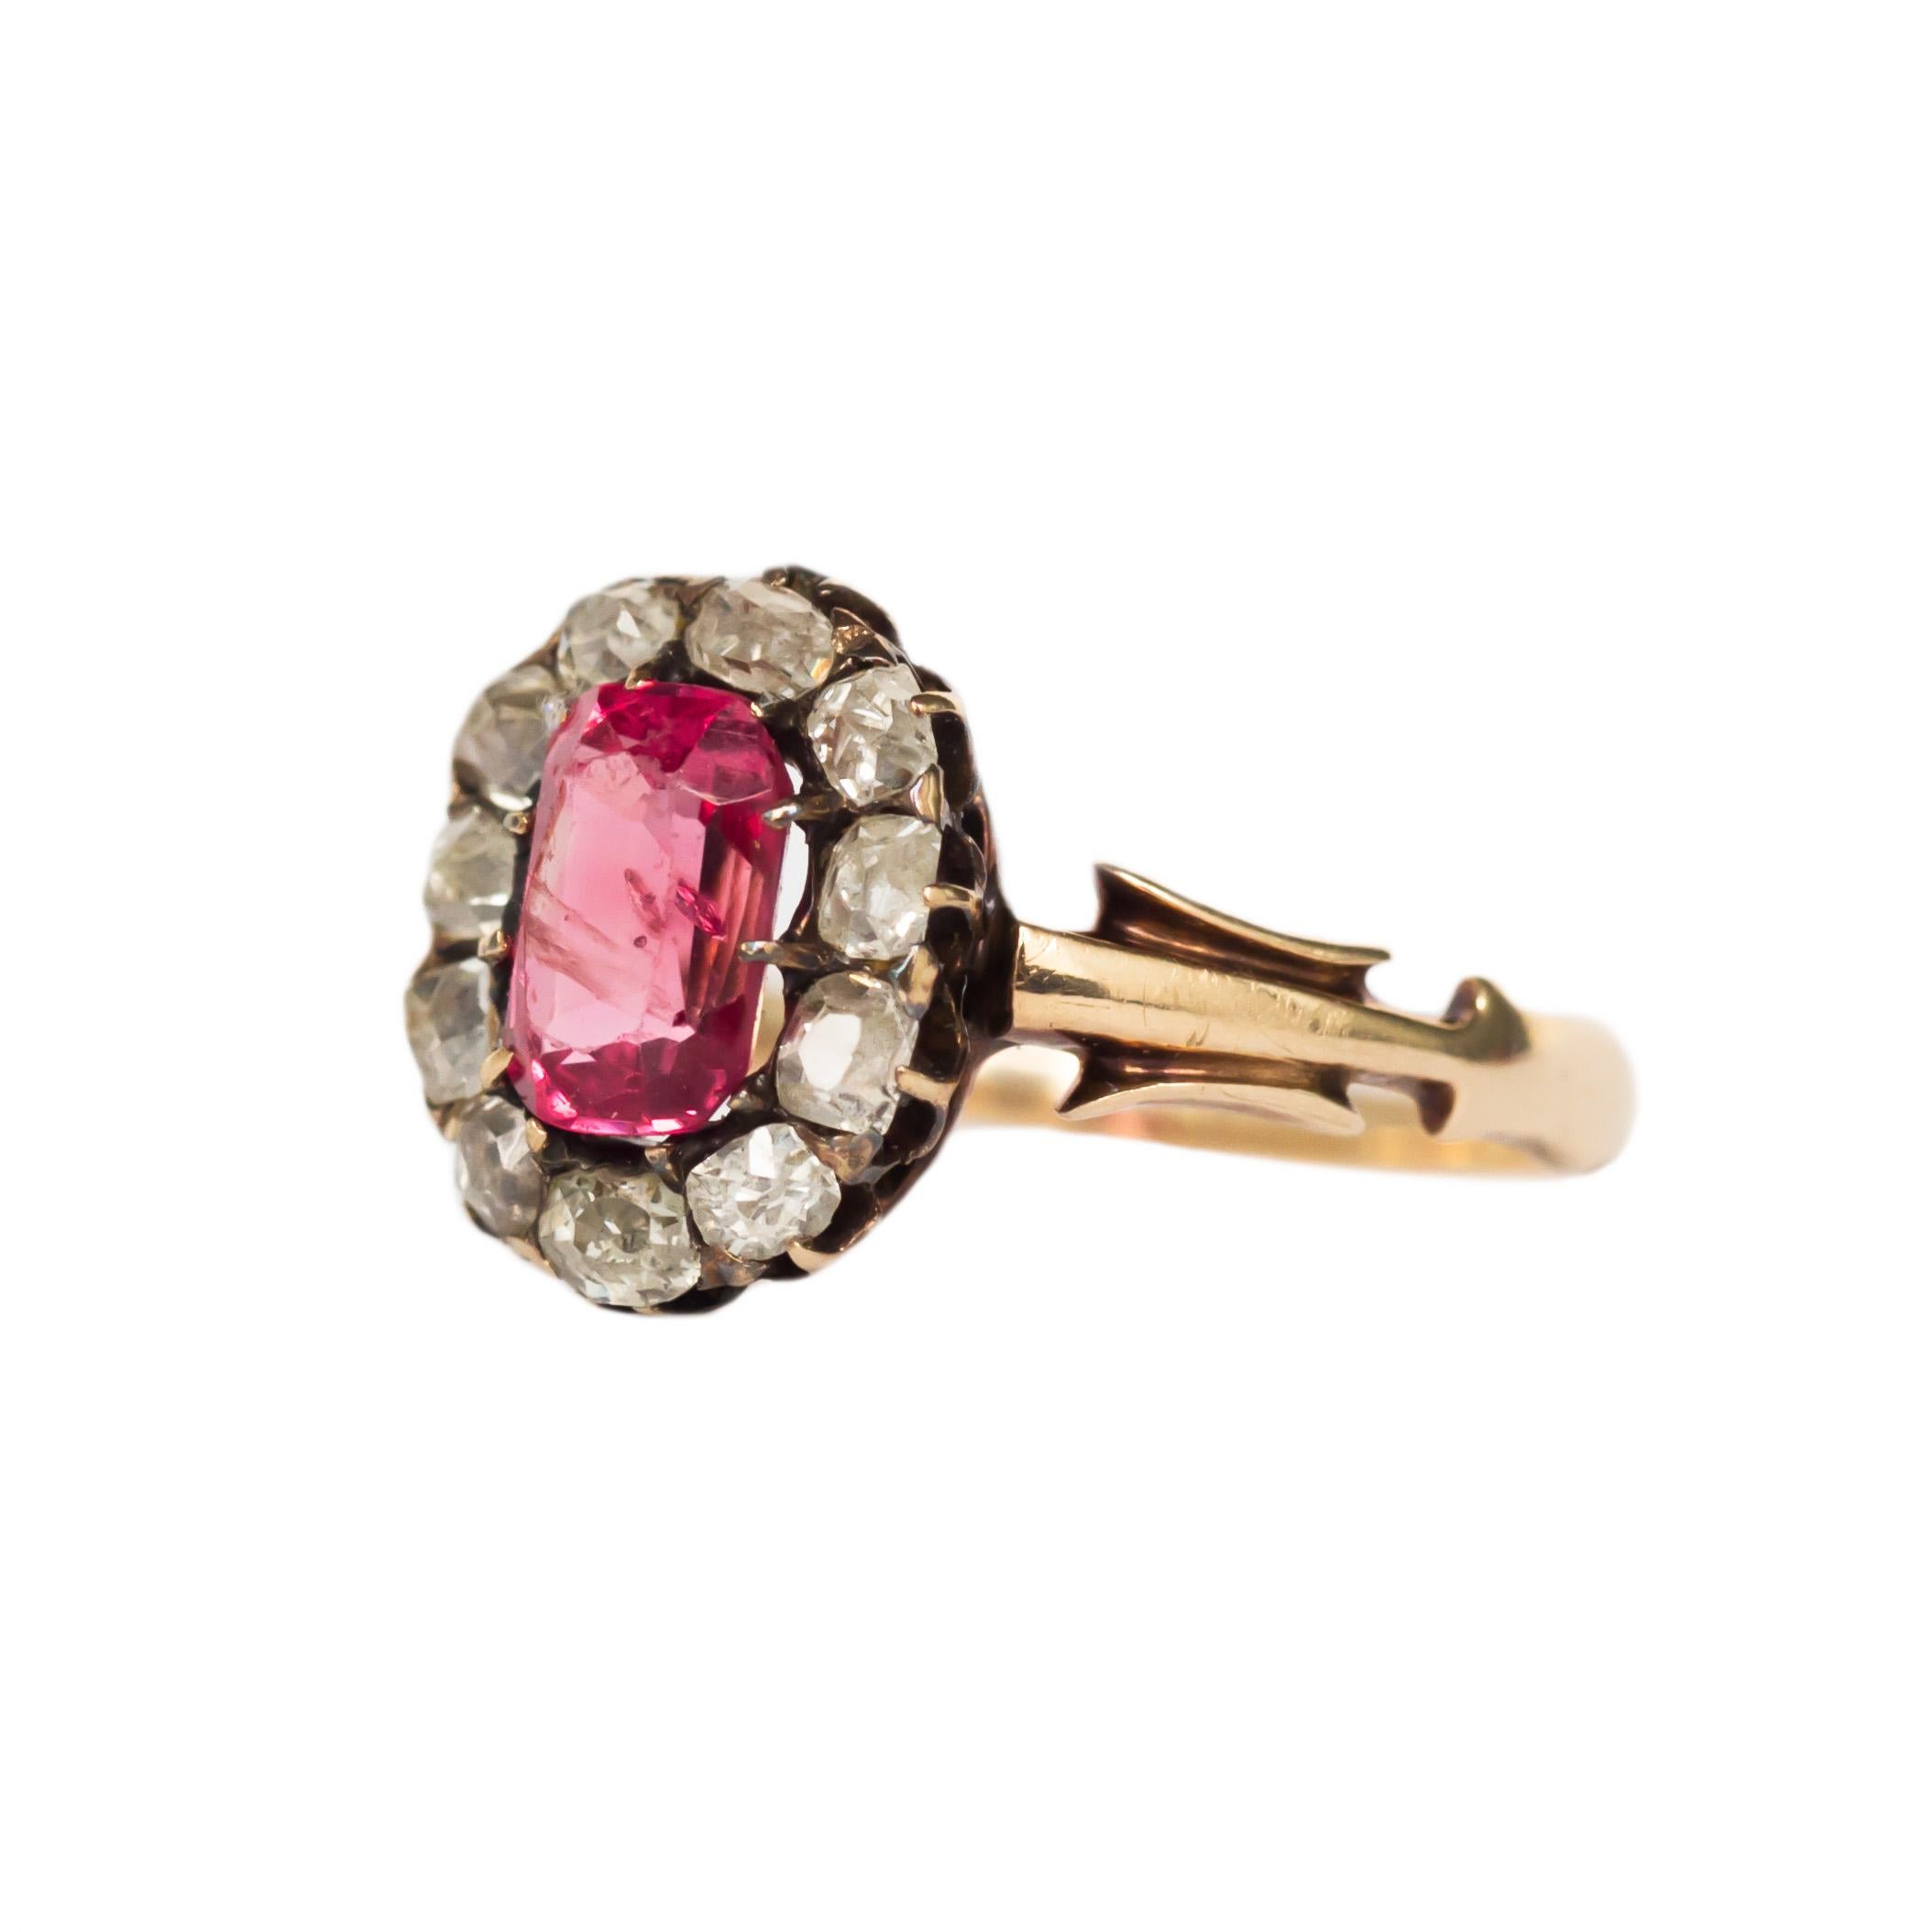 Ring Size: 6.5
Metal Type: 14 karat Yellow Gold 
Weight: 3.2 grams

Color Stone Details: 
Type: Natural Pink Spinel 
Shape: Antique Cushion
Carat Weight: 1.00 carat
Color: Intense Pink
(LIGHT INCLUSIONS)

Side Stone Details: 
Shape: Antique Cushion